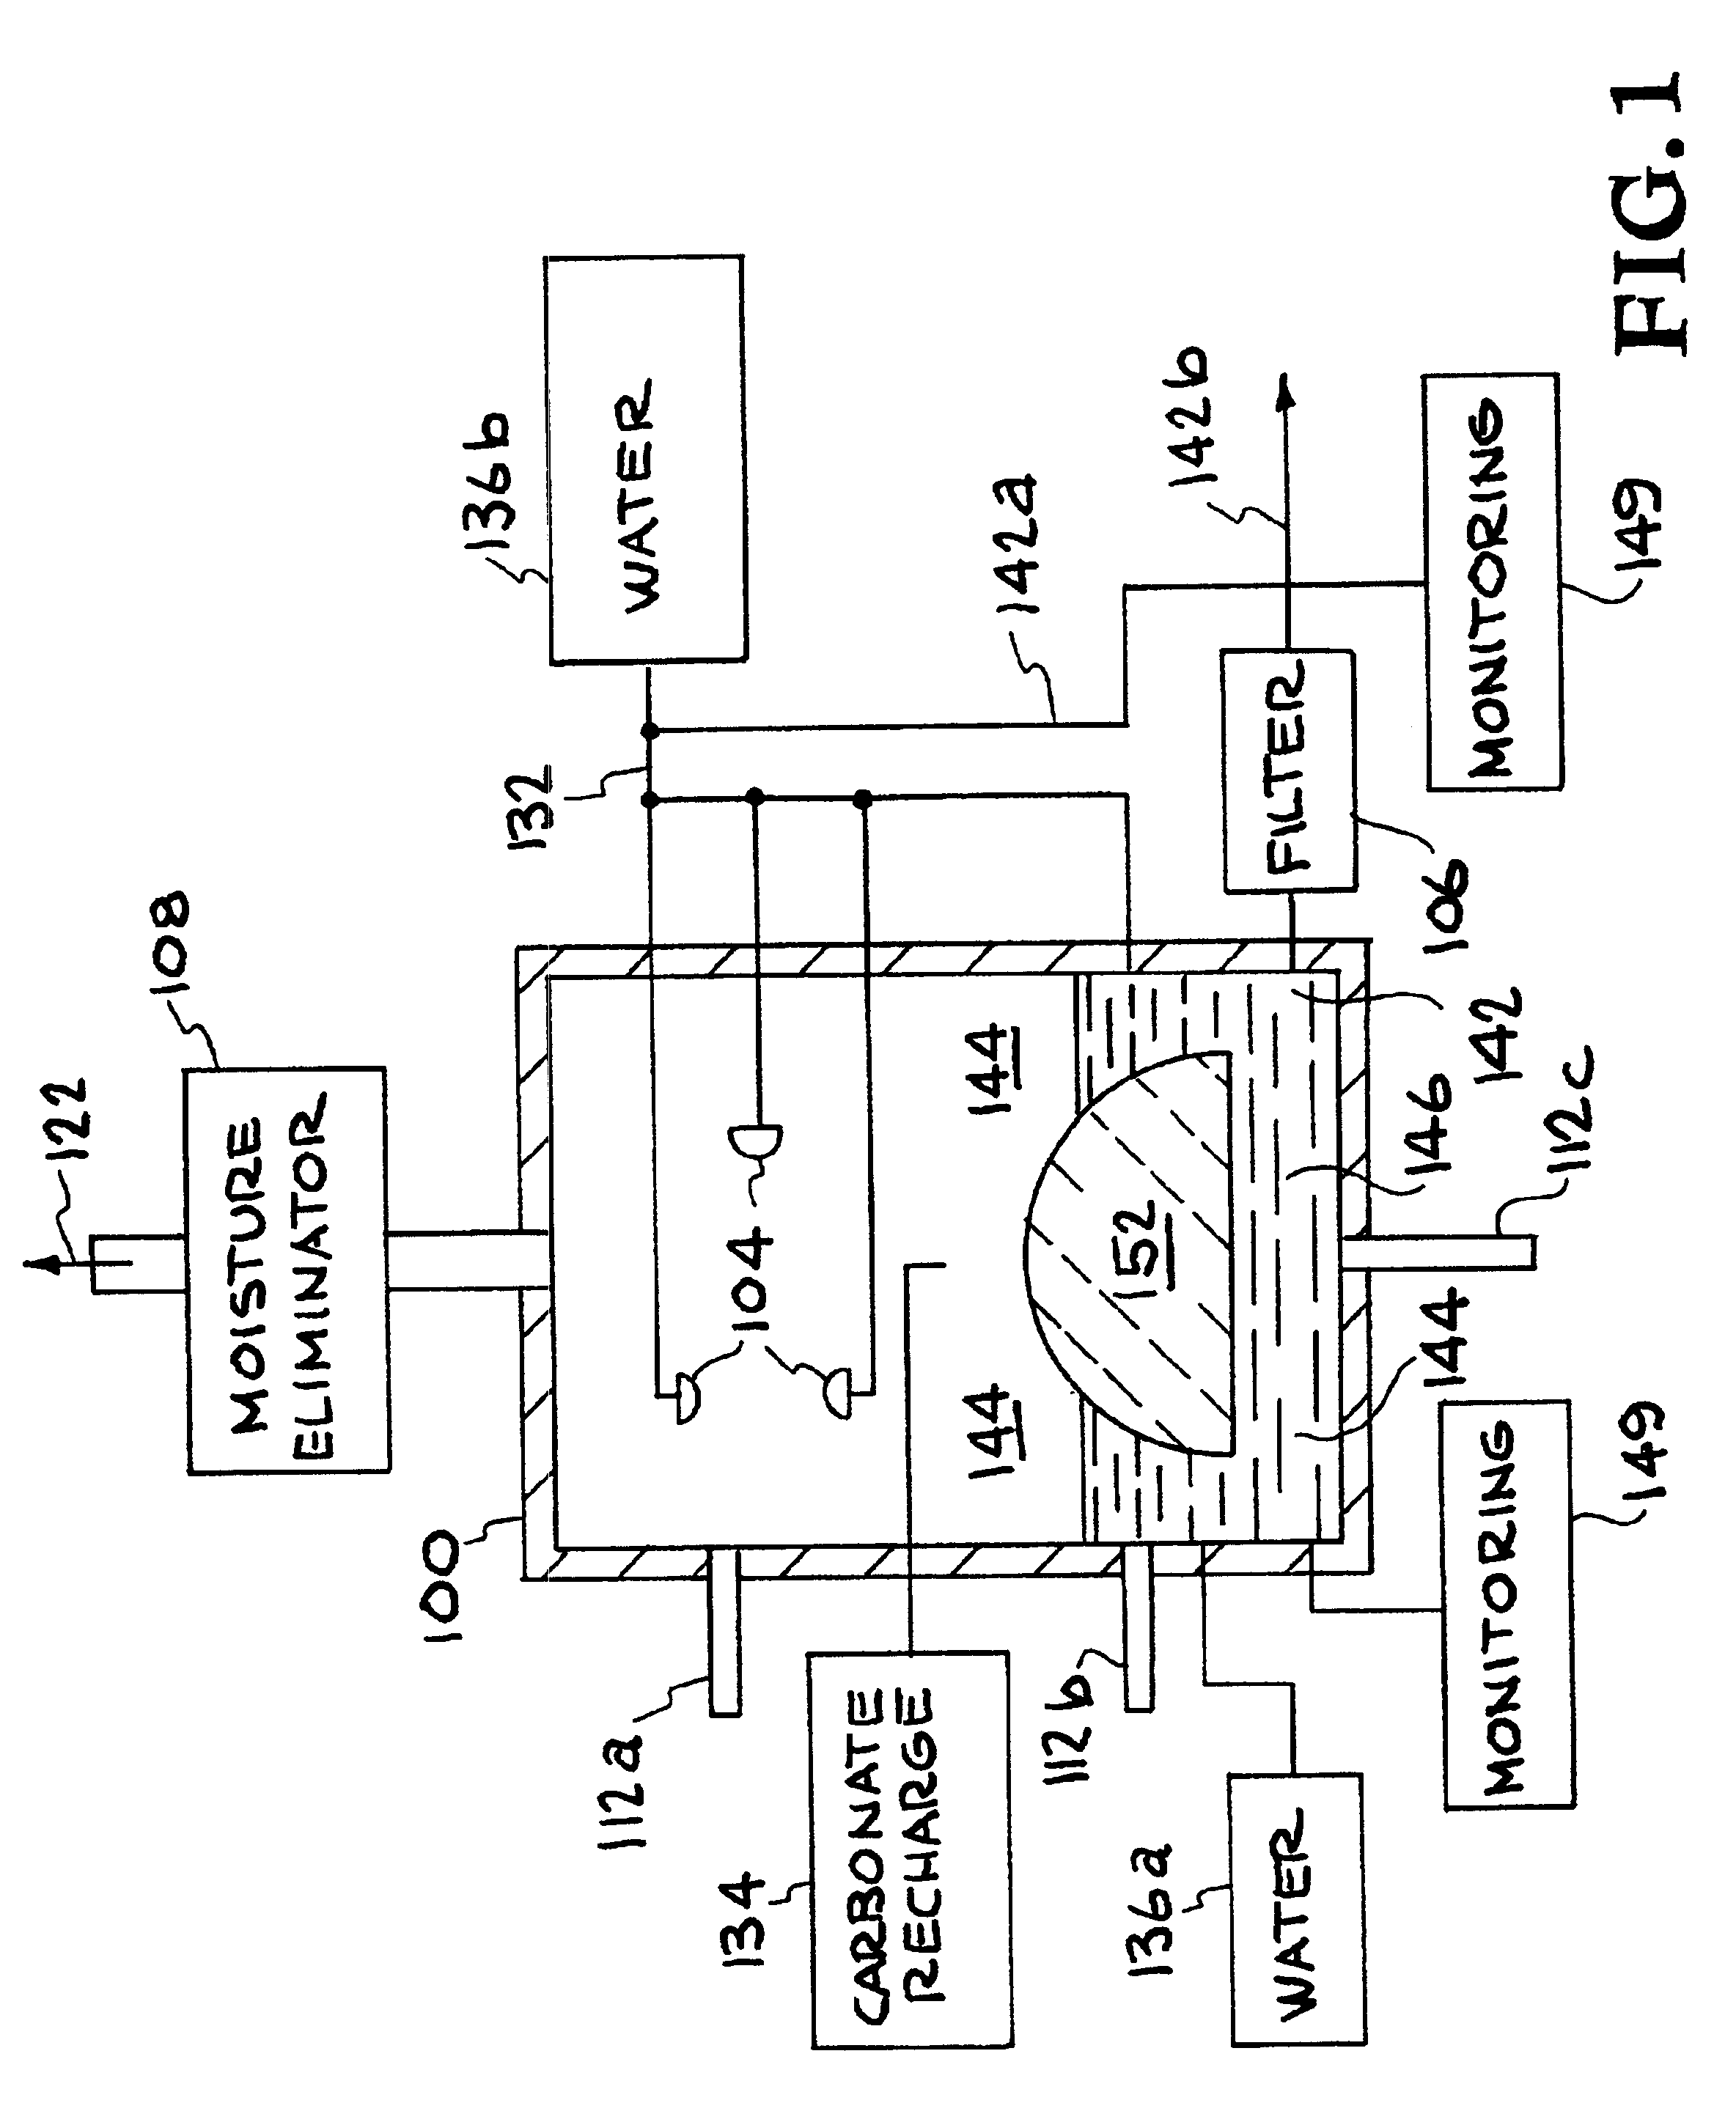 Method for extracting and sequestering carbon dioxide